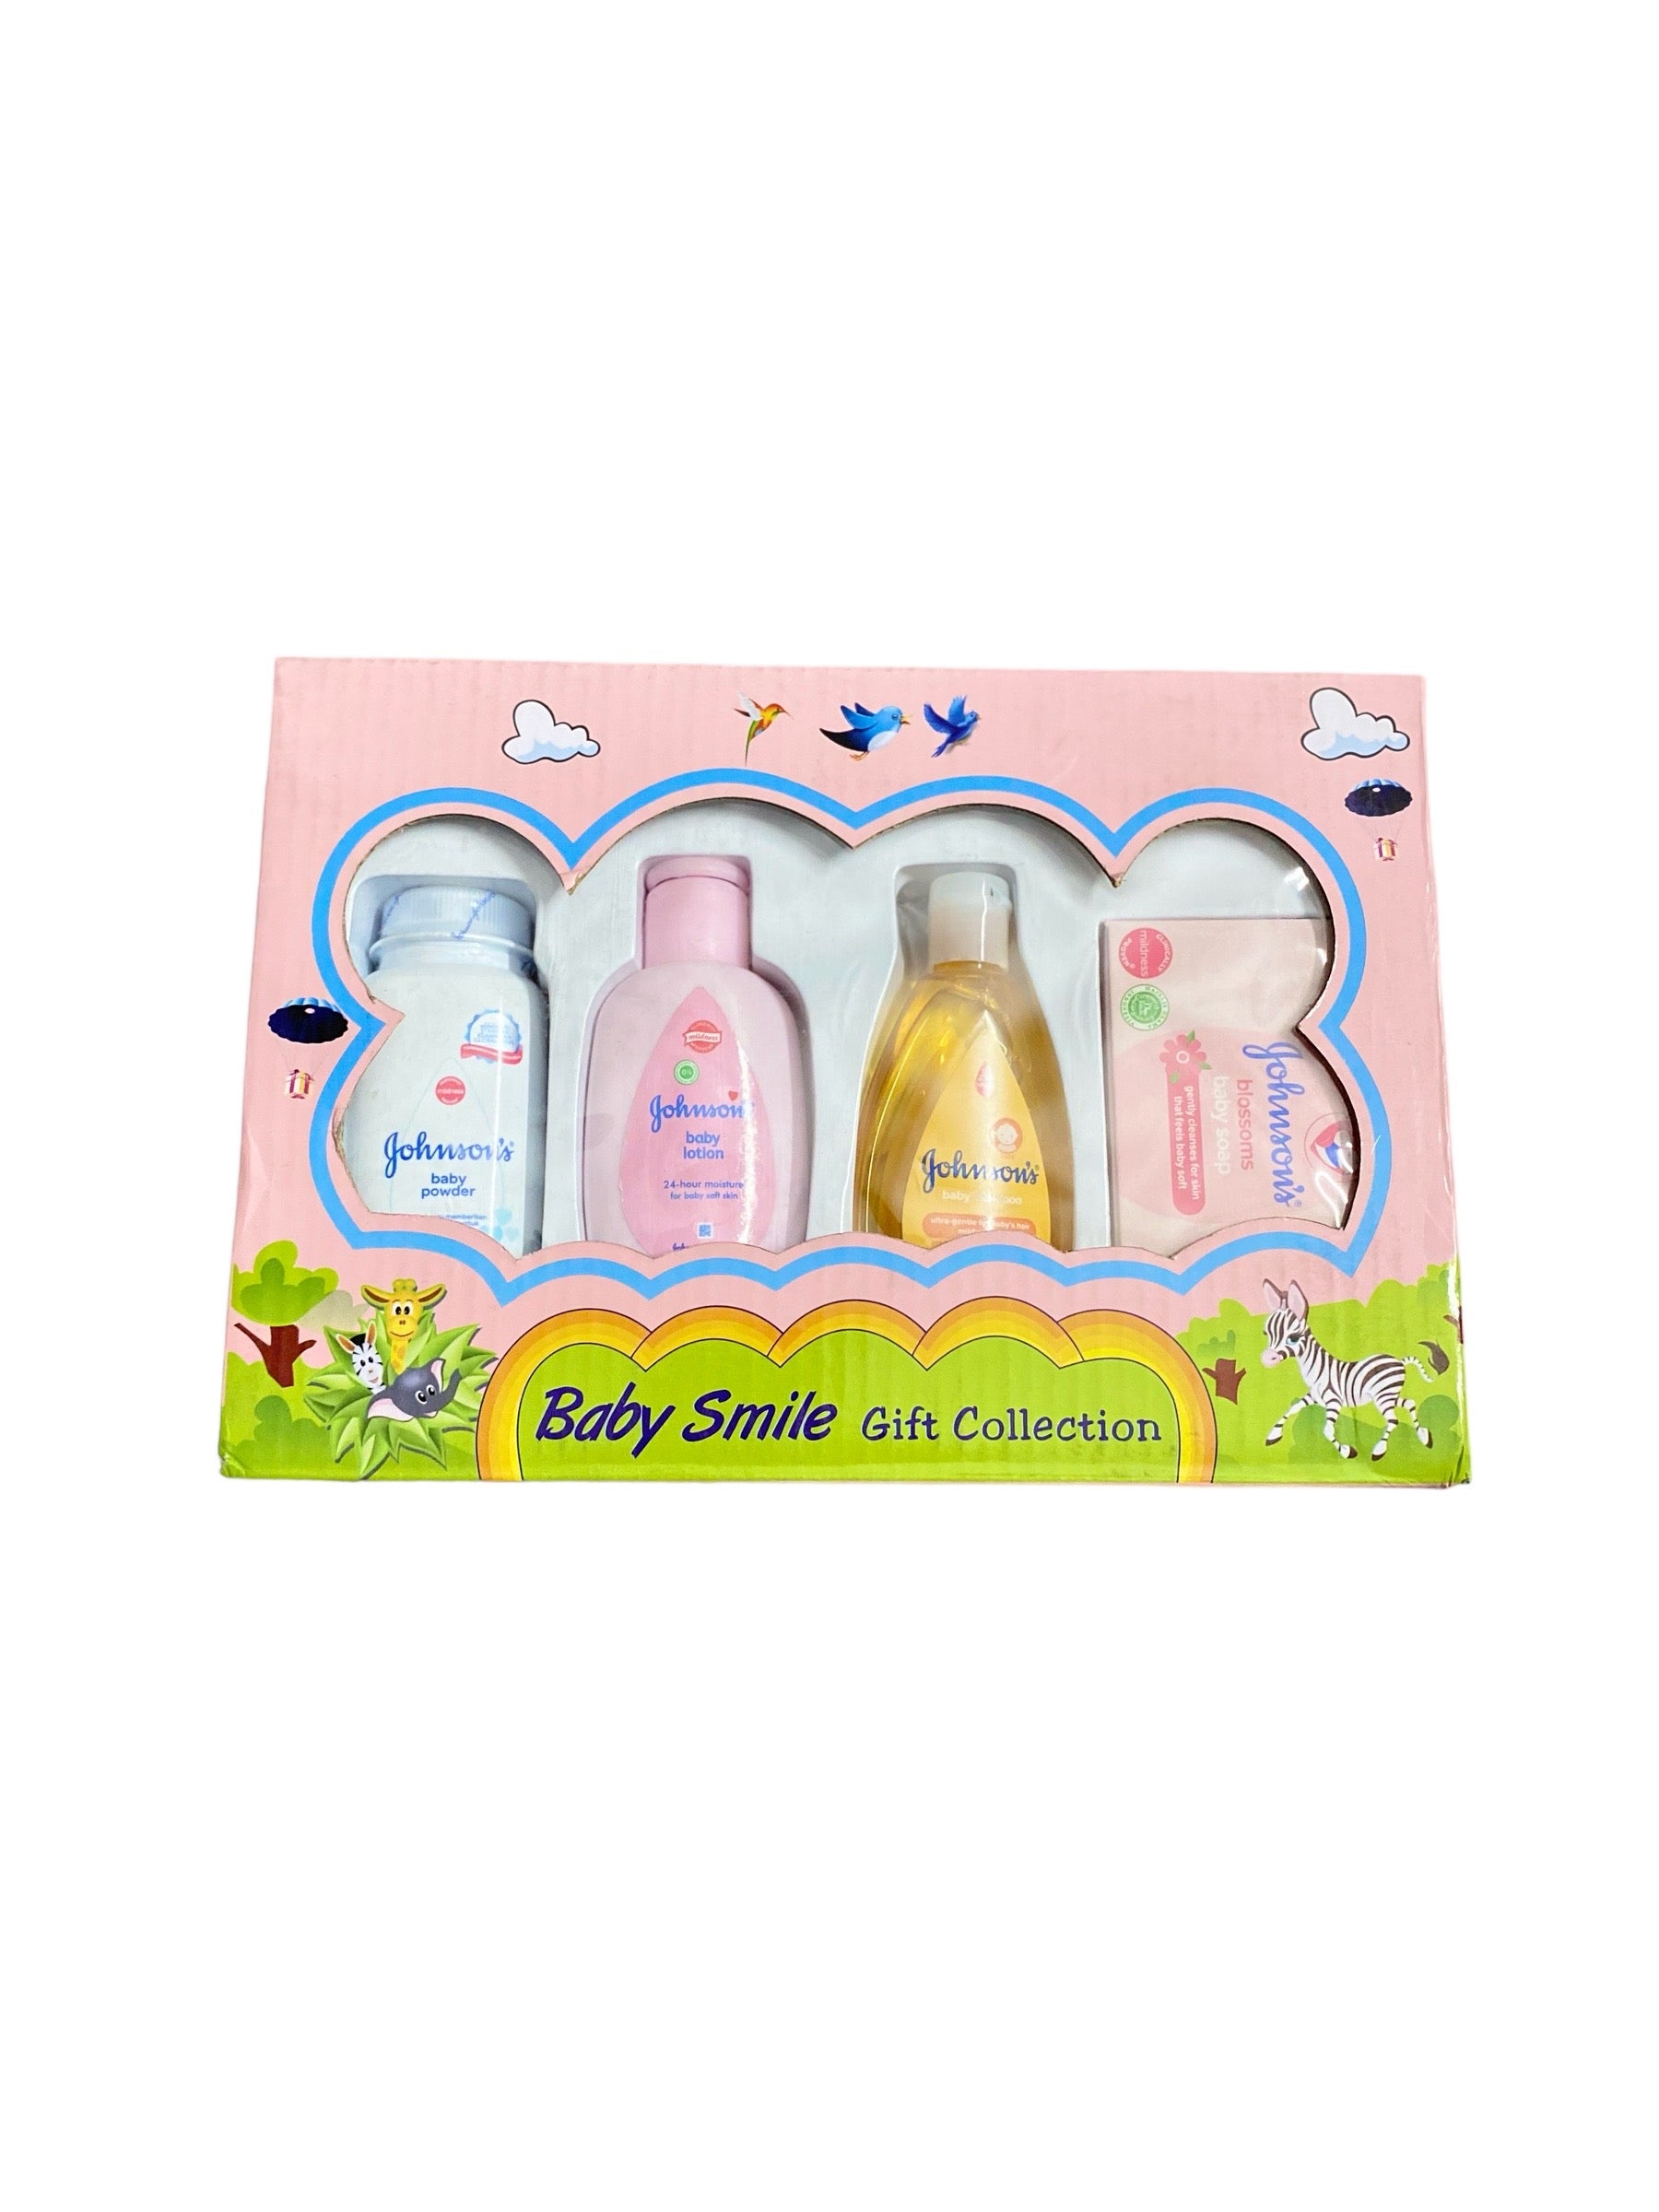 Johnsons Sleepy Time Baby Gift Set/Relaxing Natural Calm Aroma Bedtime  Essential | eBay